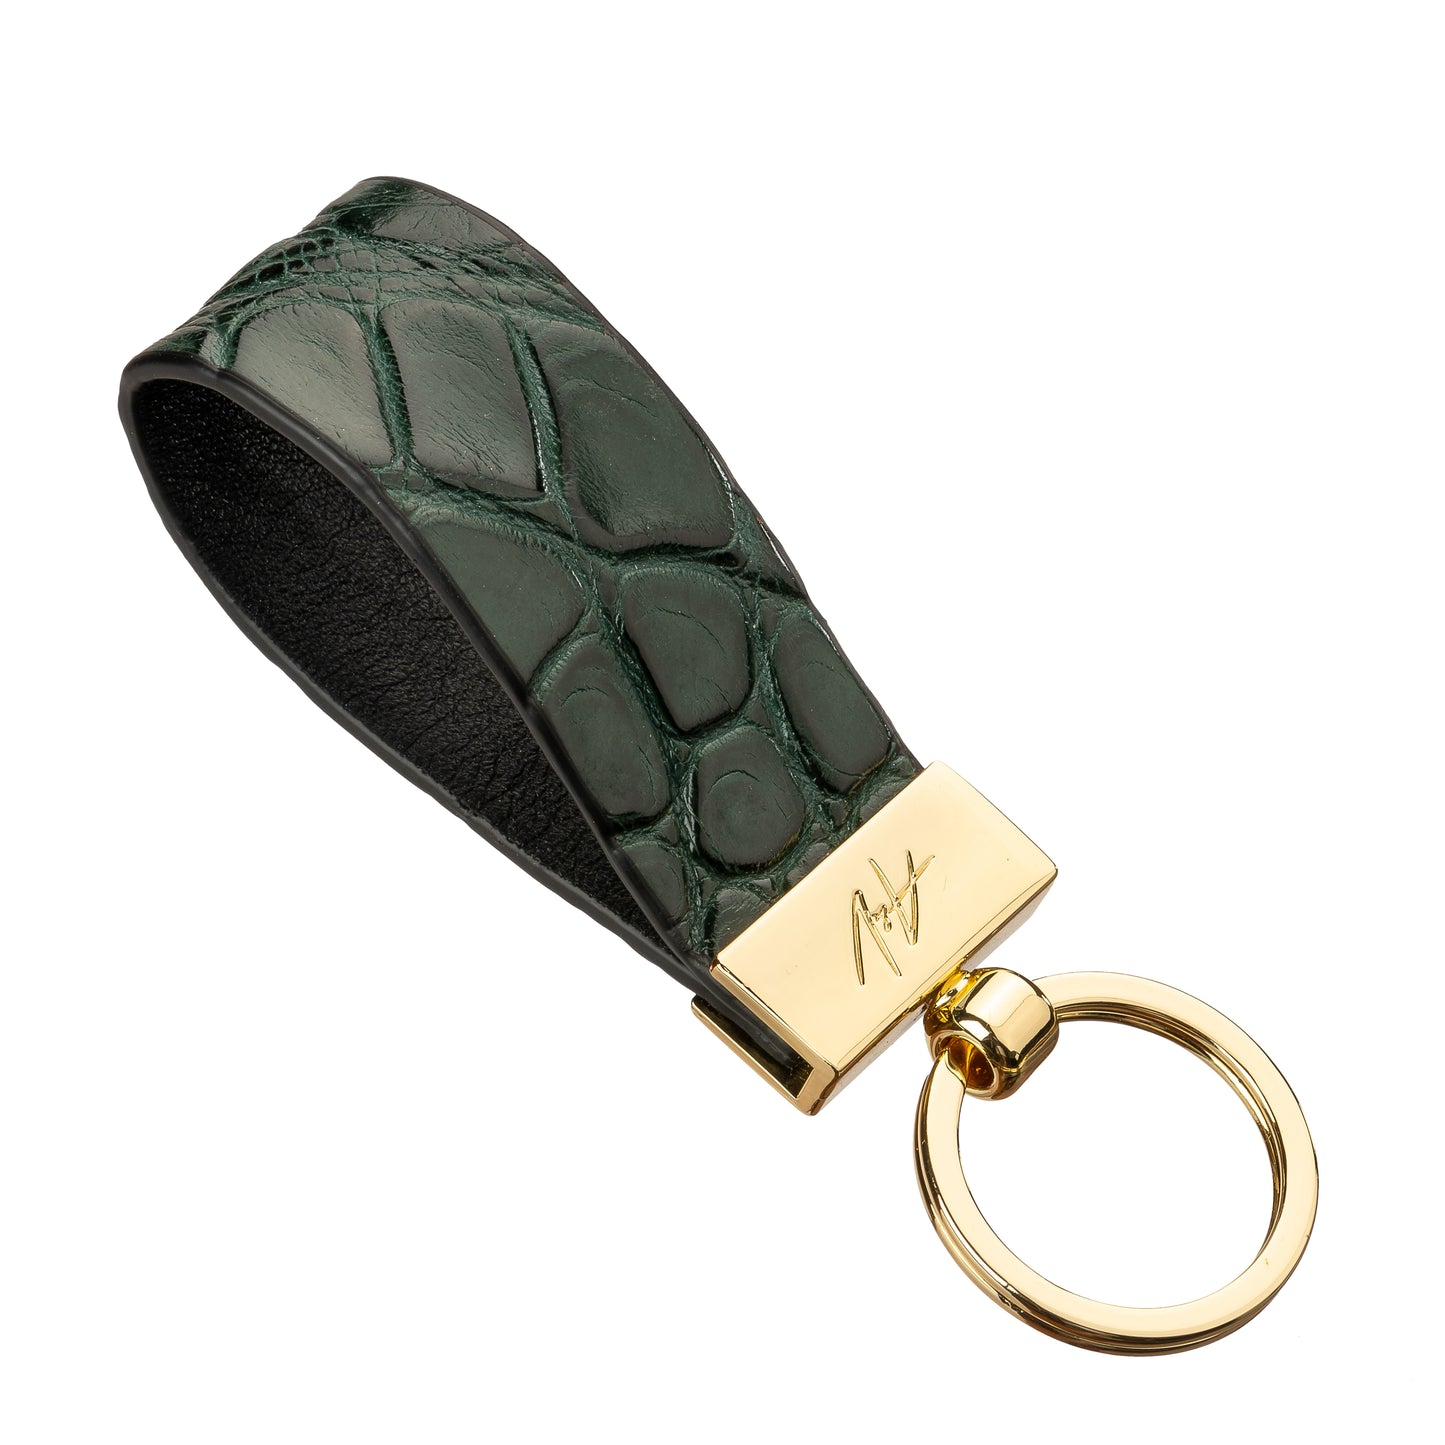 KEYCHAIN CLAMP GREEN LINE (small)